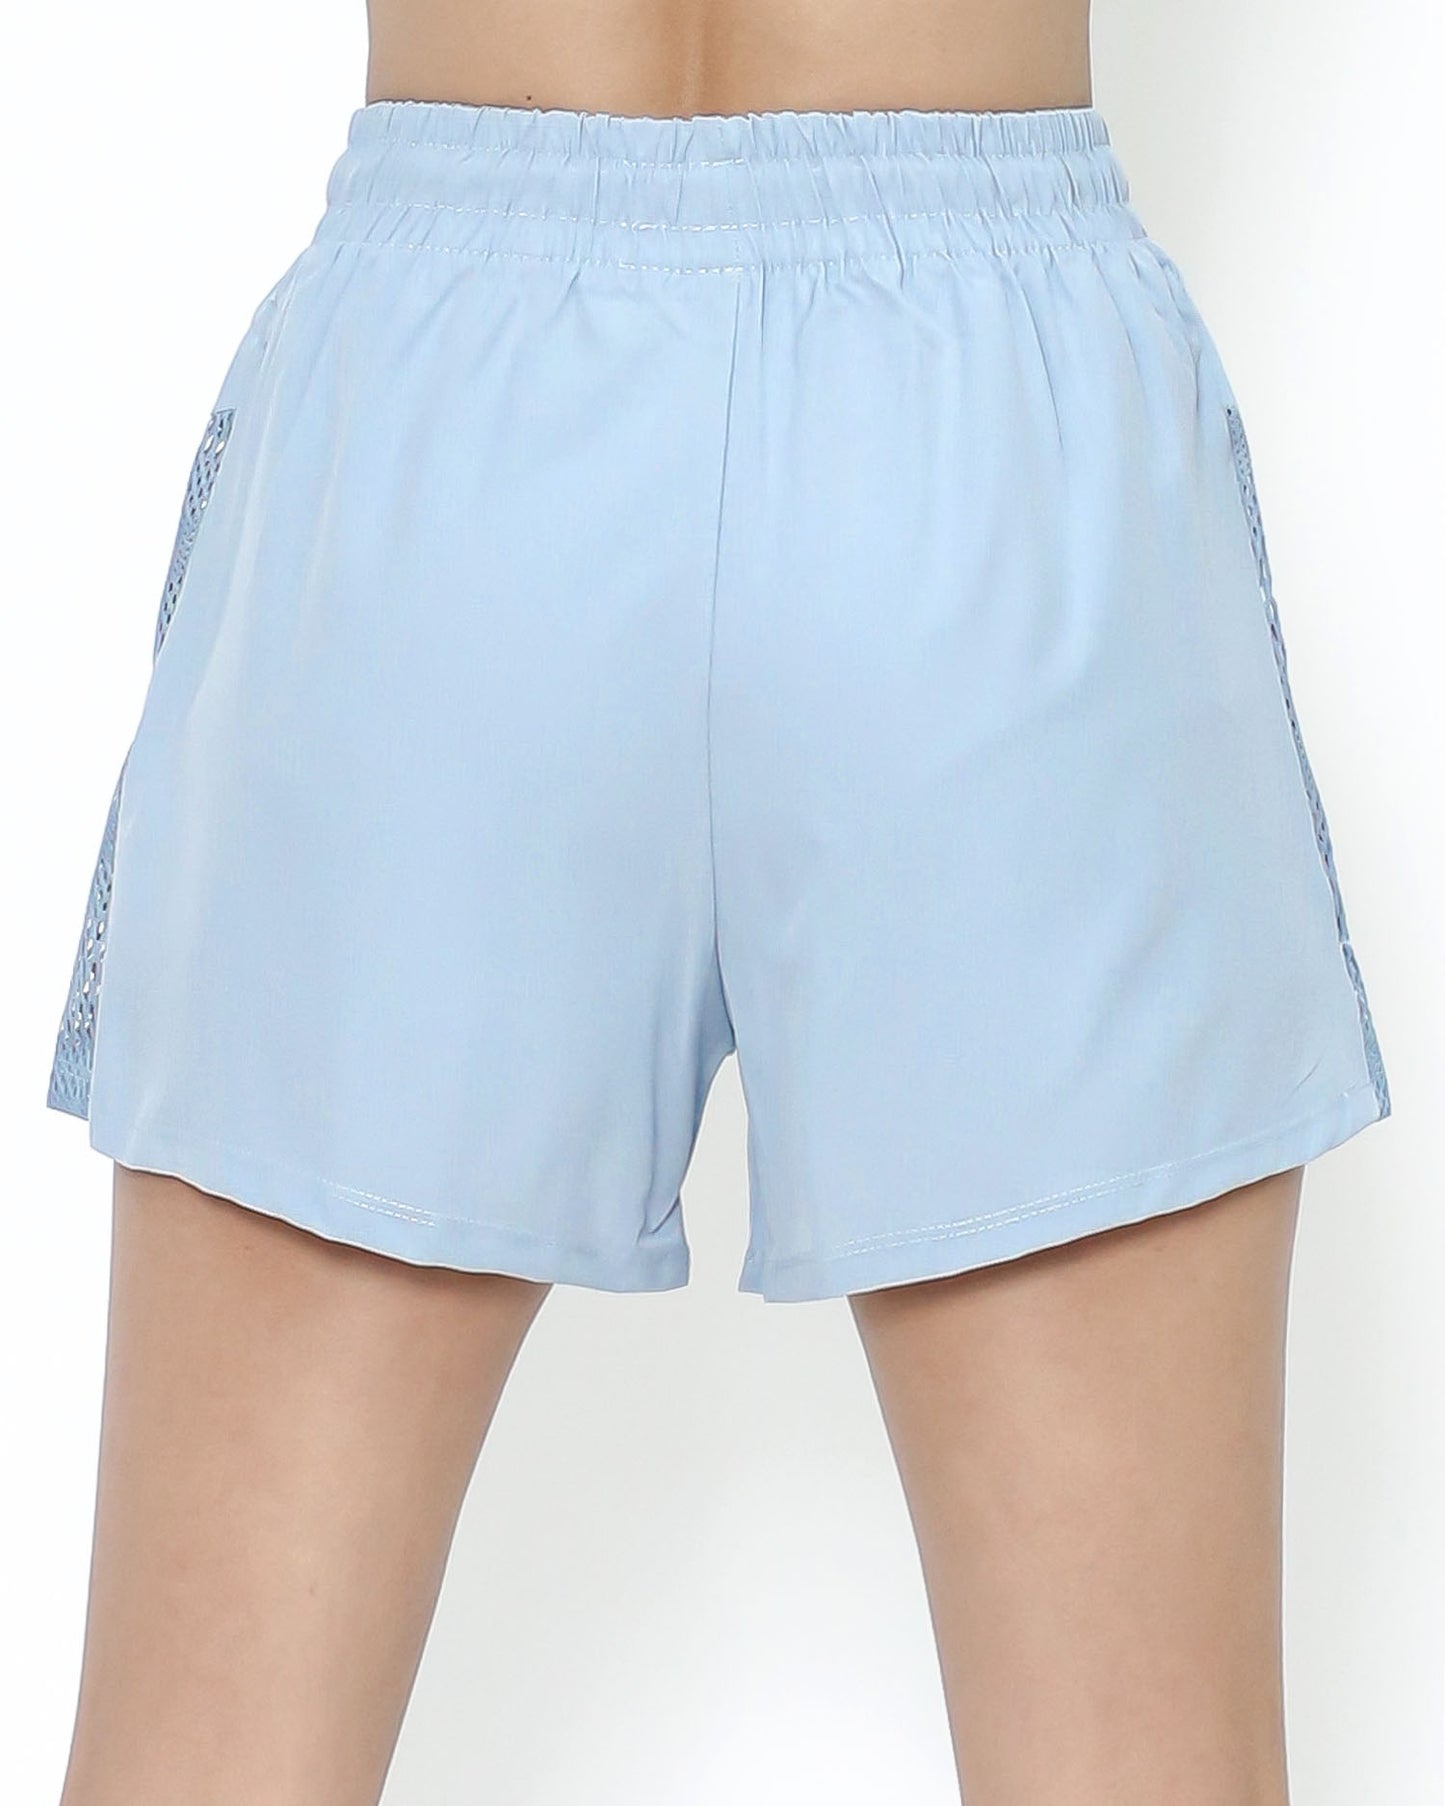 blue cage sports shorts  *pre-order*